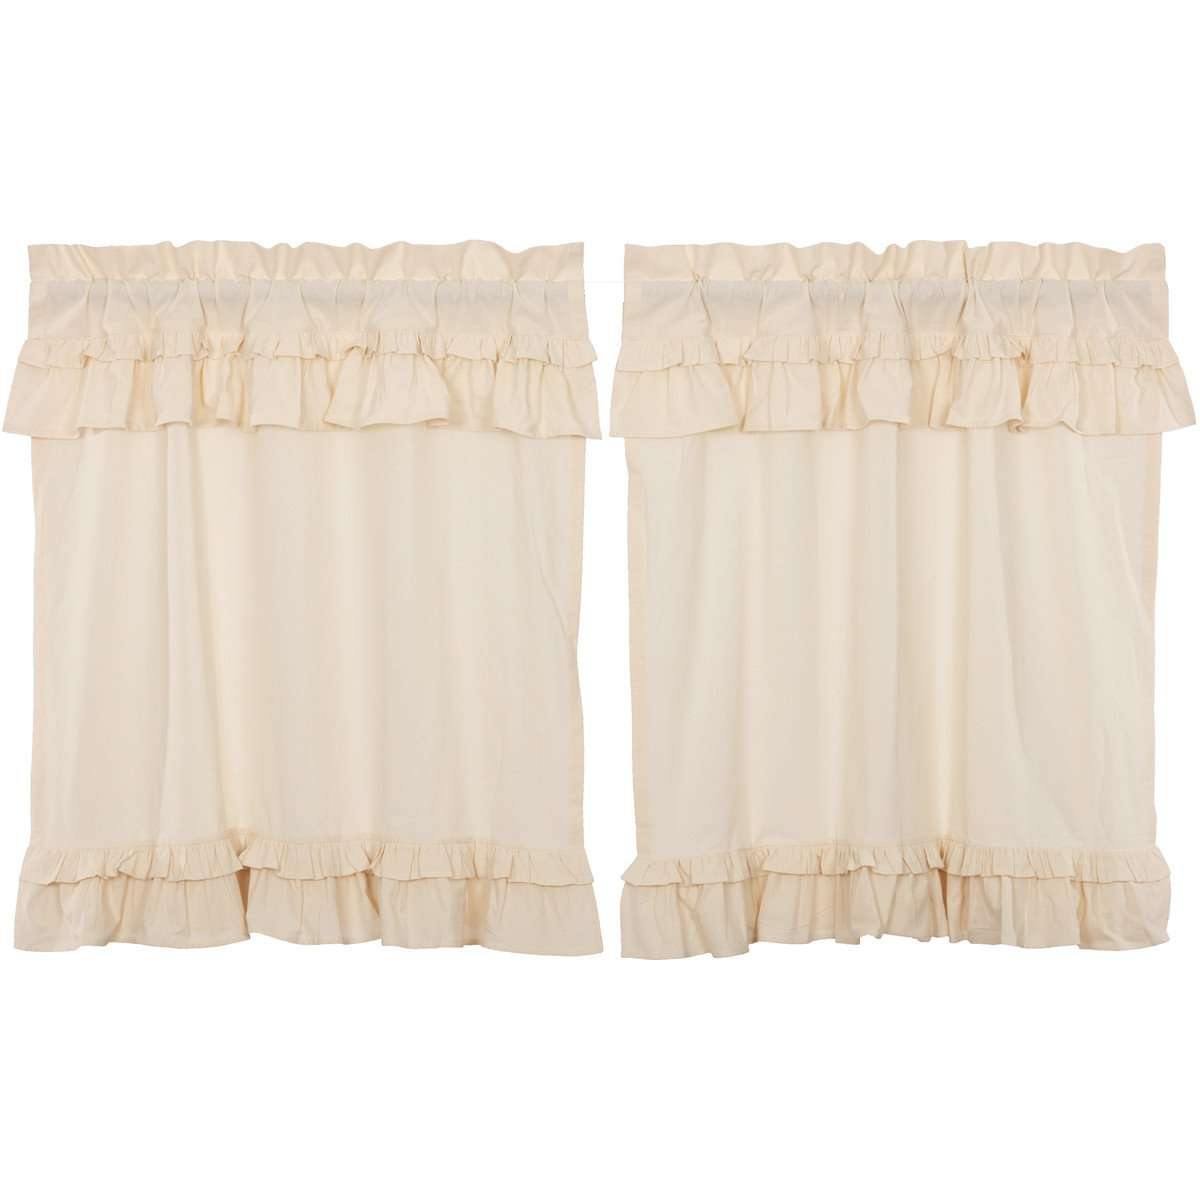 Muslin Ruffled Unbleached Natural Tier Curtain Set of 2 L36xW36 VHC Brands - The Fox Decor